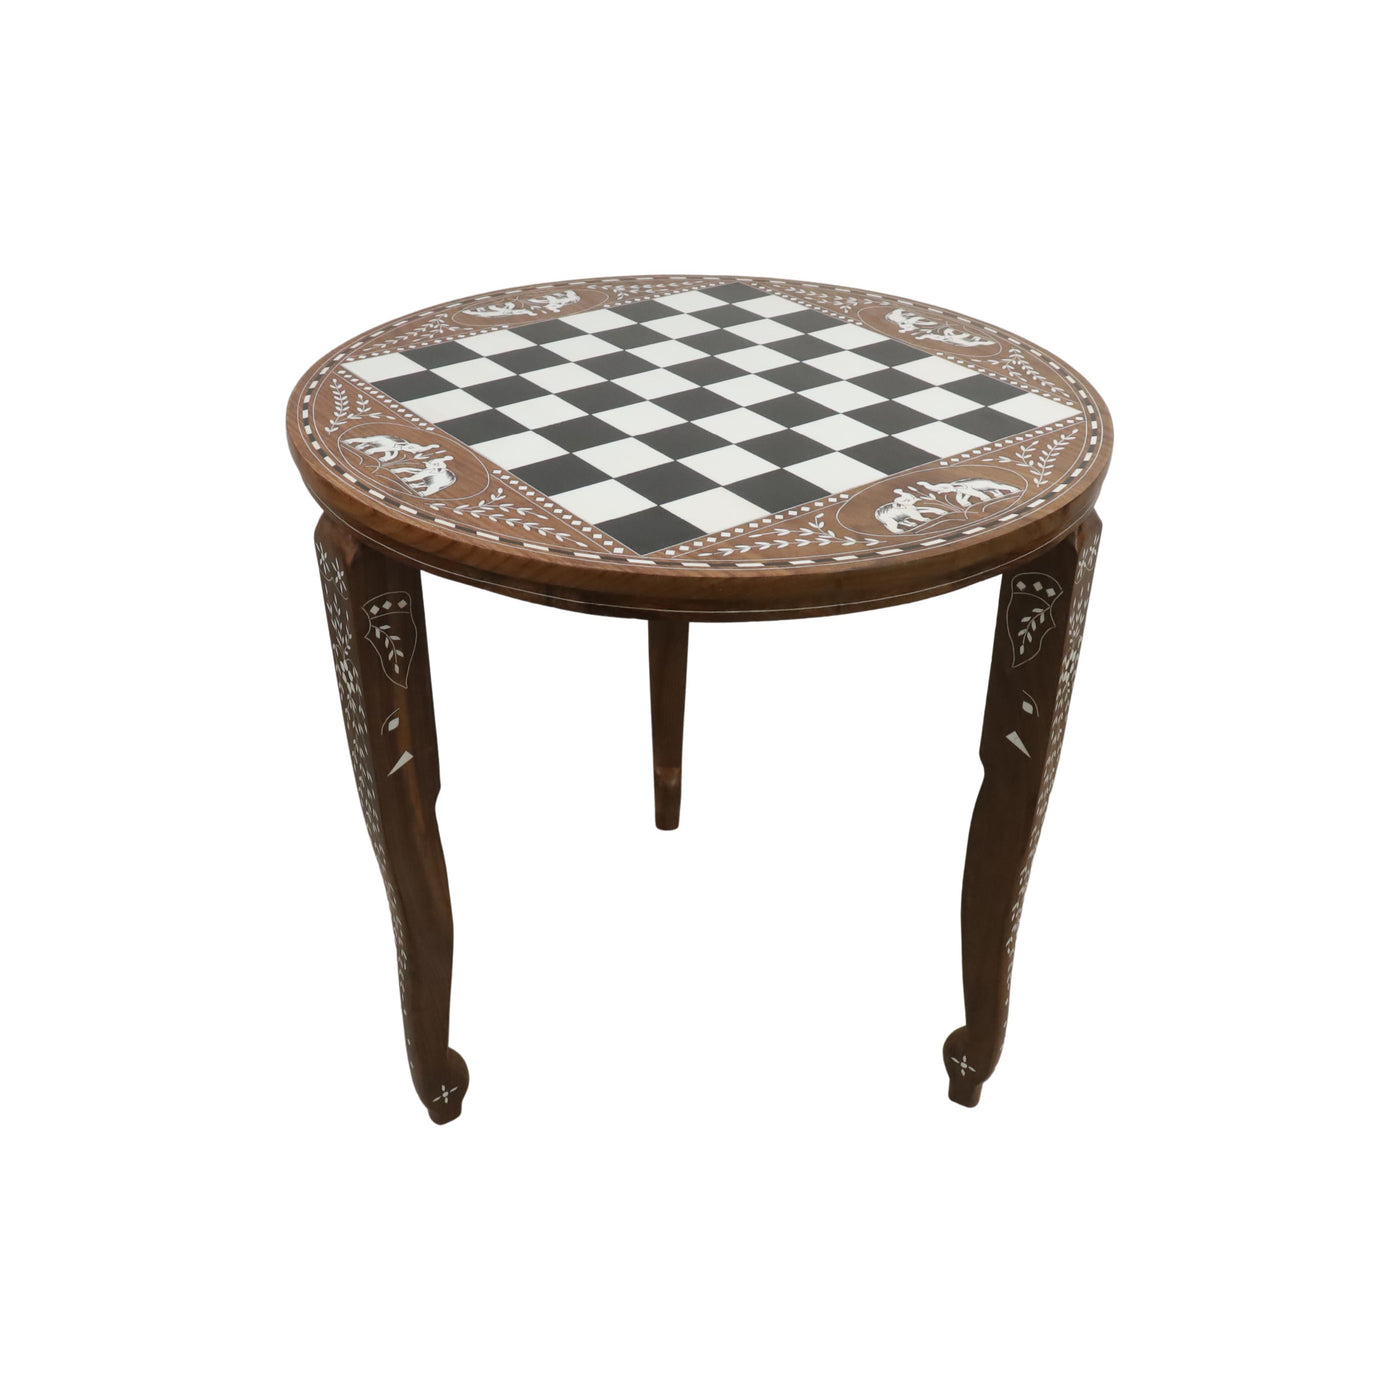 24" Boutique Luxury Round Chess Board Table with Staunton Chess Pieces - Weighted Ebonised Boxwood